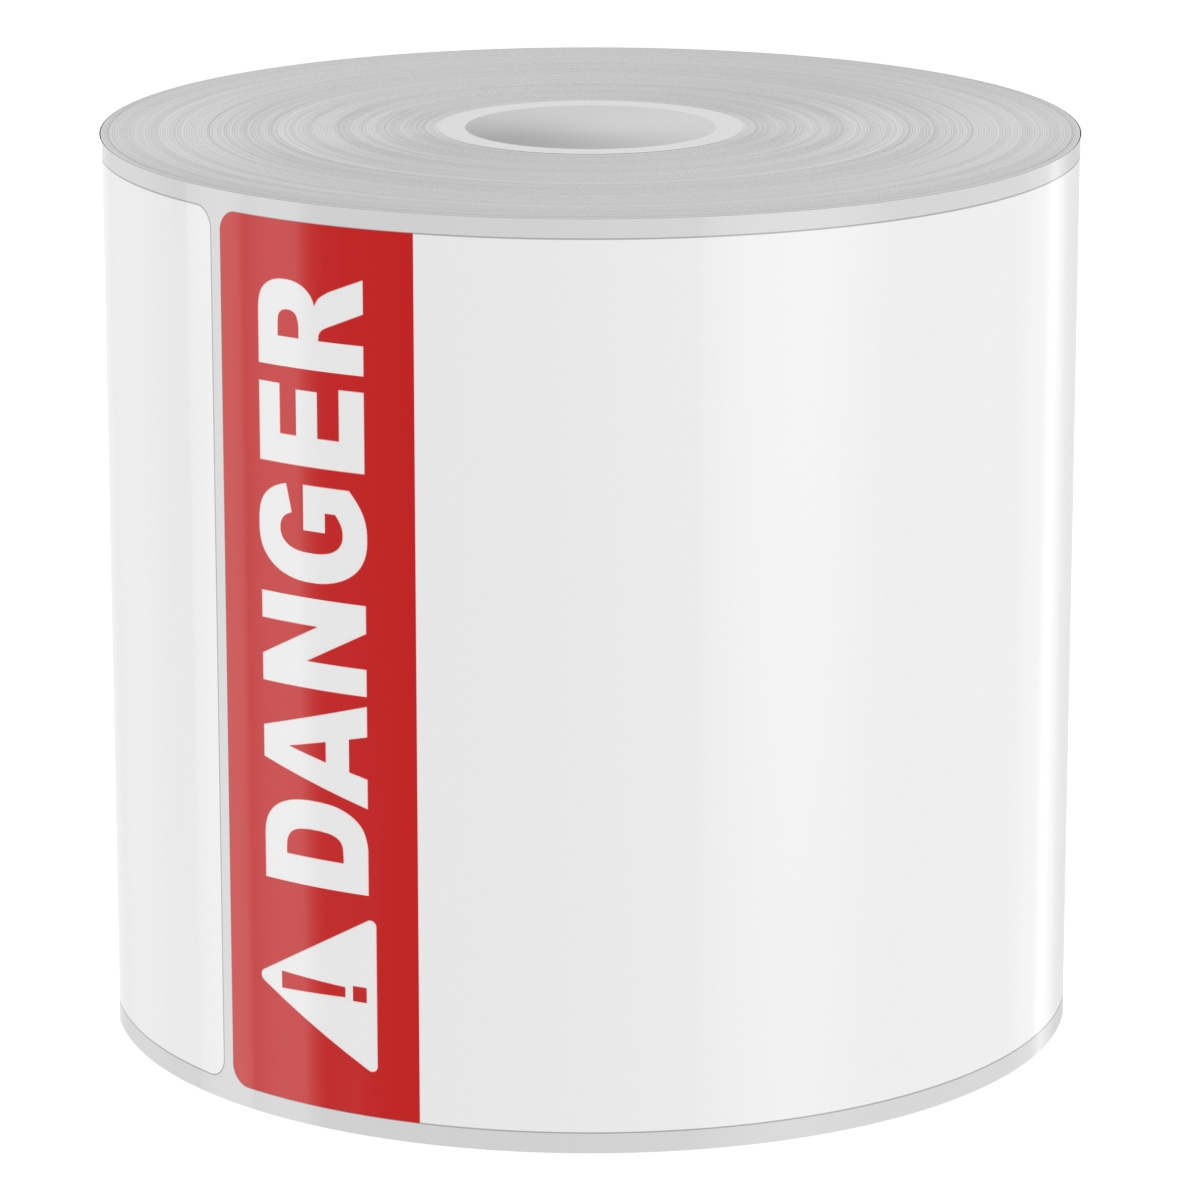 Ask a question about 250 4" x 6" High-Performance Portrait Die-Cut Labels with Red Danger Header